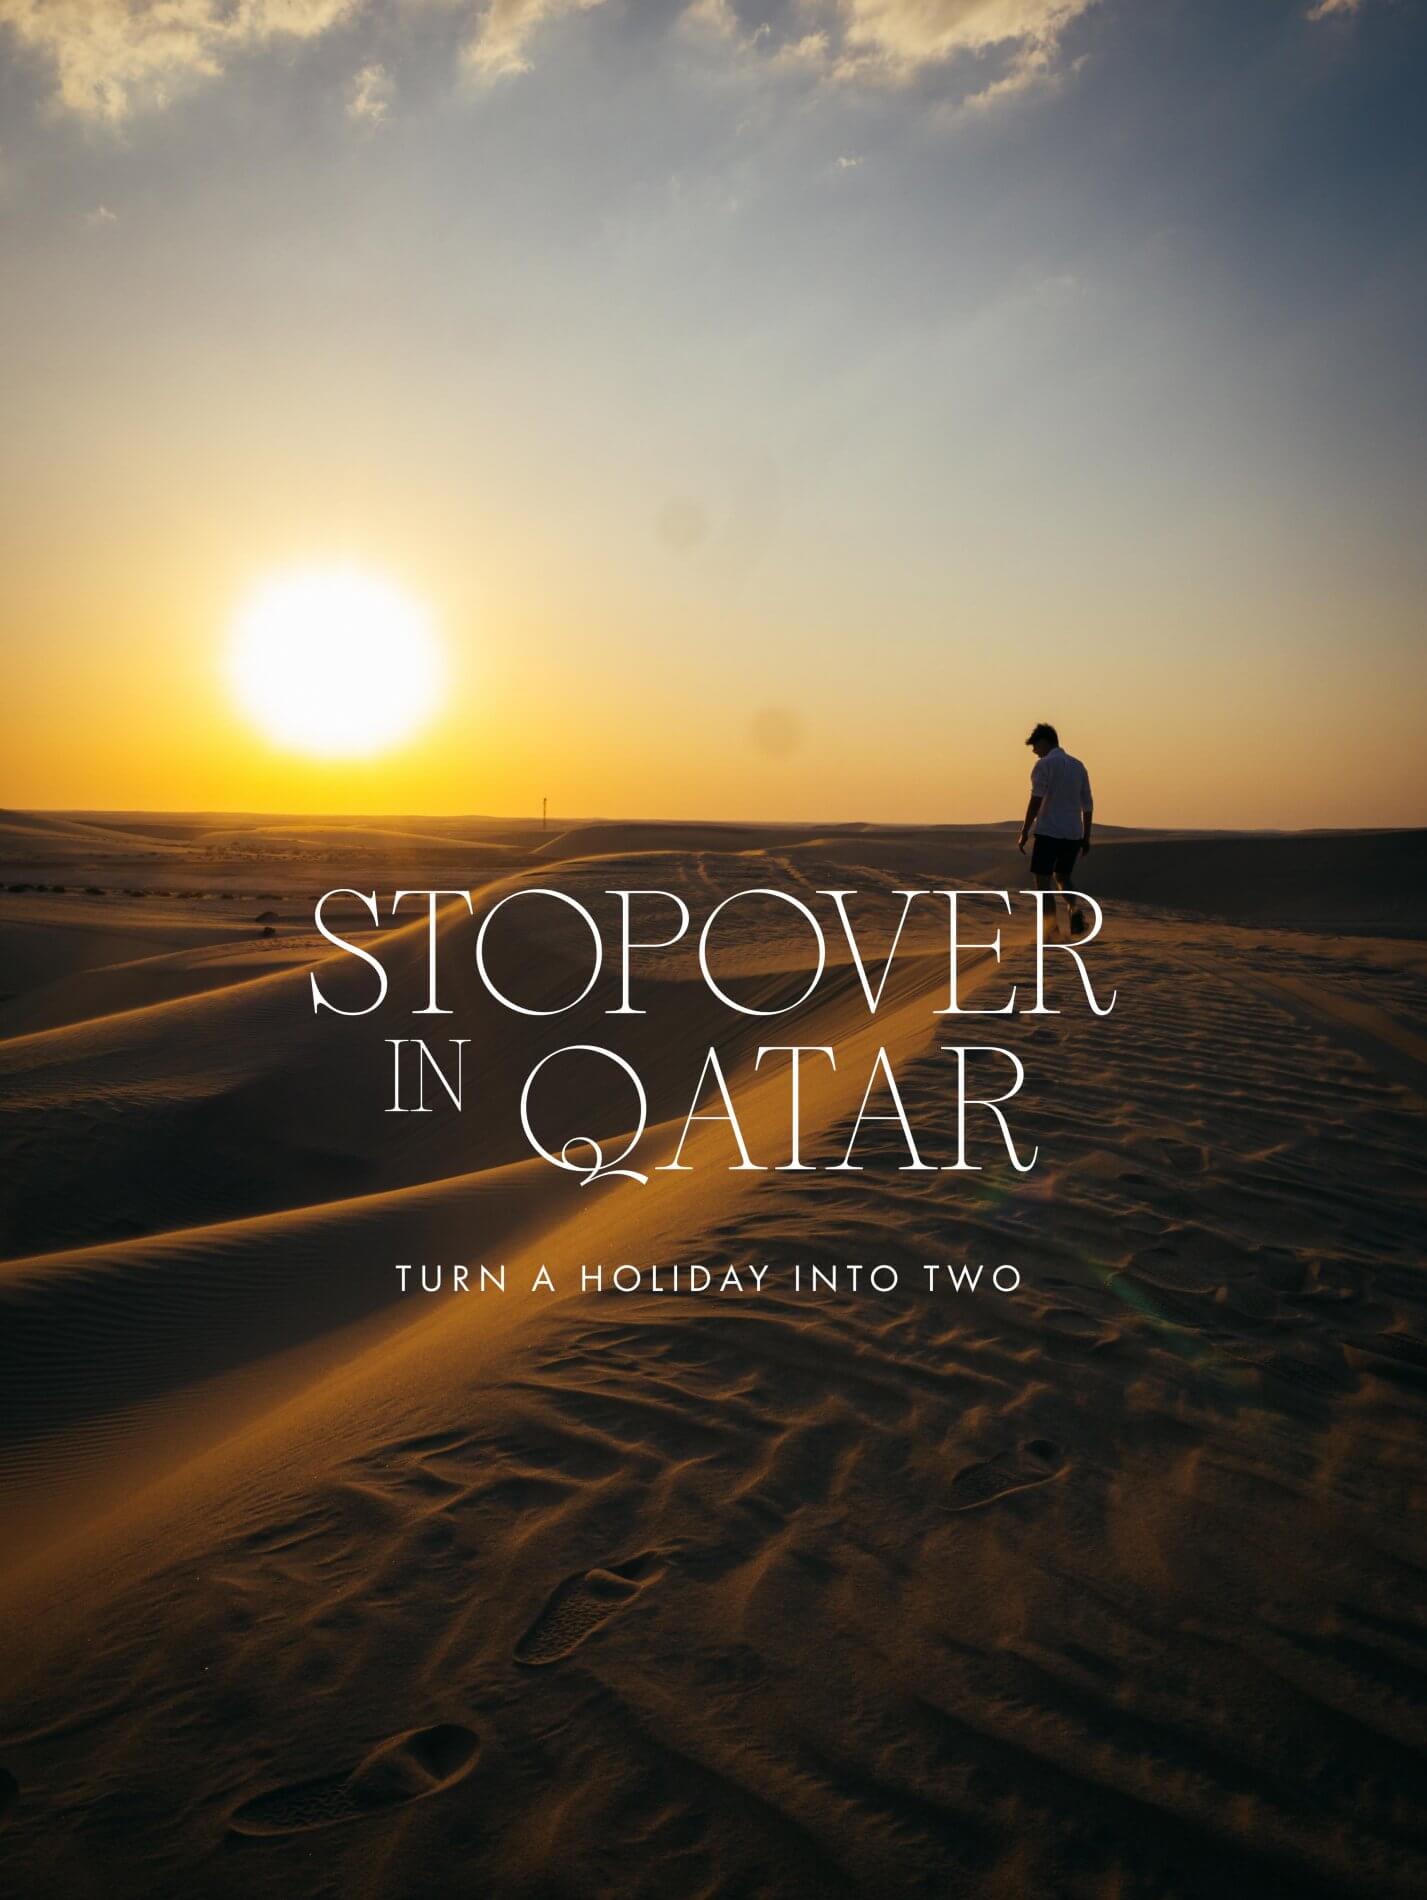 Qatar, An unforgettable stopover holiday!